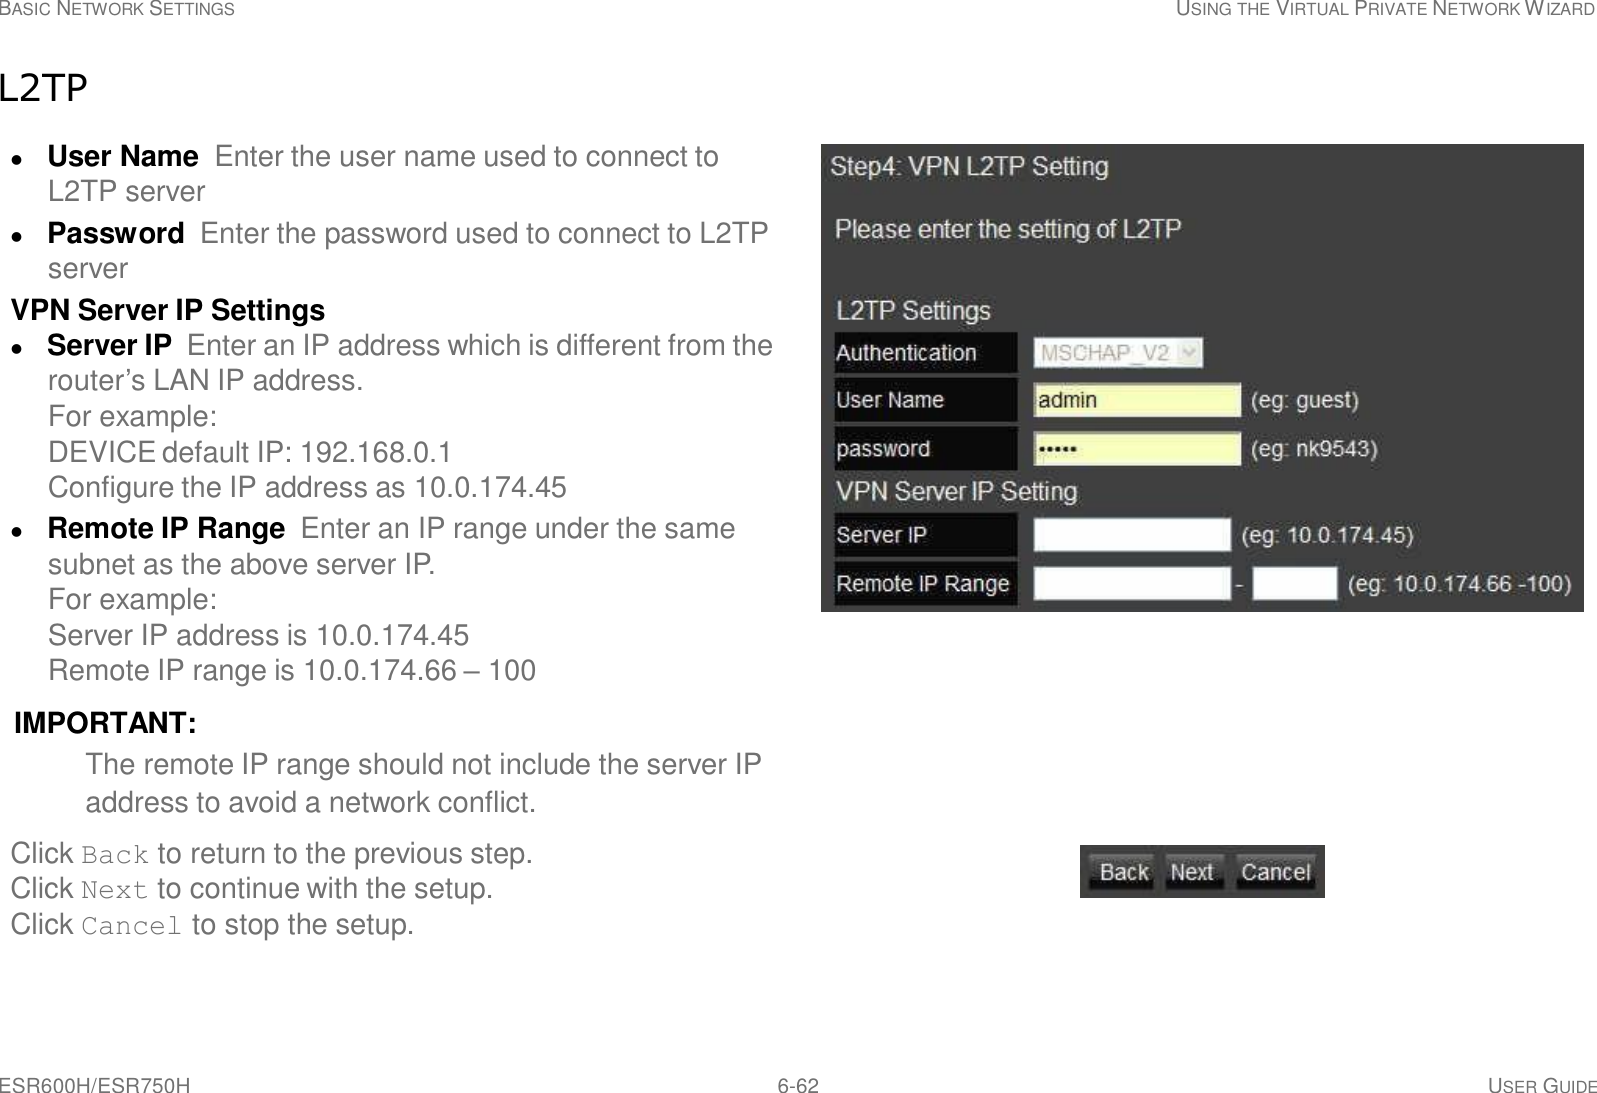 ESR600H/ESR750H 6-62 USER GUIDE BASIC NETWORK SETTINGS USING THE VIRTUAL PRIVATE NETWORK WIZARD     L2TP   User Name  Enter the user name used to connect to L2TP server  Password  Enter the password used to connect to L2TP server VPN Server IP Settings  Server IP  Enter an IP address which is different from the router’s LAN IP address. For example: DEVICE default IP: 192.168.0.1 Configure the IP address as 10.0.174.45  Remote IP Range  Enter an IP range under the same subnet as the above server IP. For example: Server IP address is 10.0.174.45 Remote IP range is 10.0.174.66 – 100  IMPORTANT: The remote IP range should not include the server IP address to avoid a network conflict.  Click Back to return to the previous step. Click Next to continue with the setup. Click Cancel to stop the setup. 